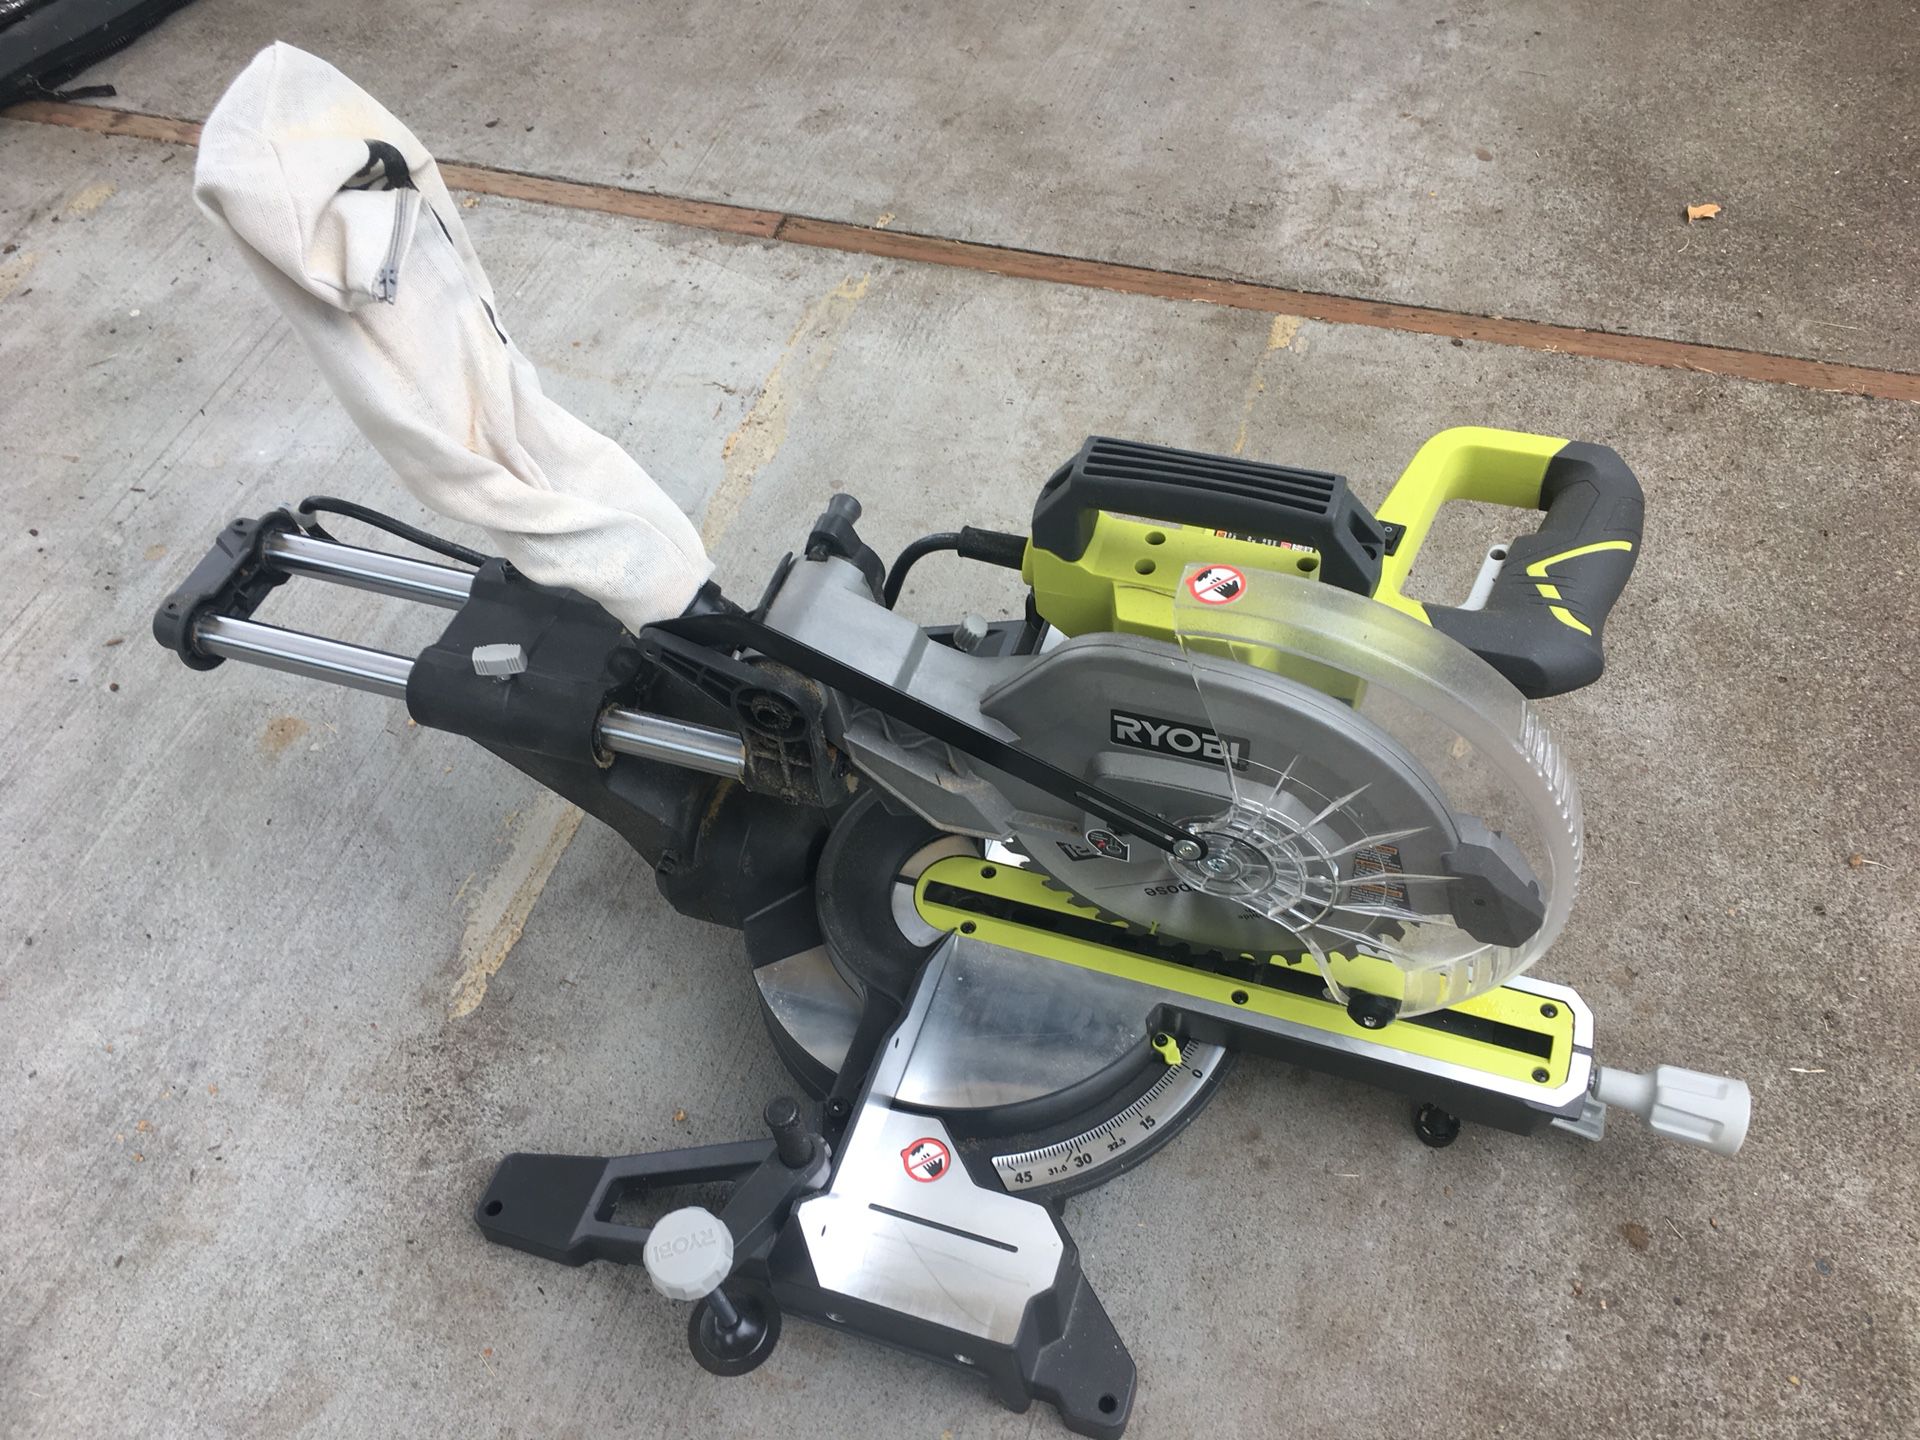 Ryobi 10 Inch Sliding Miter Saw With Laser For Sale In Portland Or